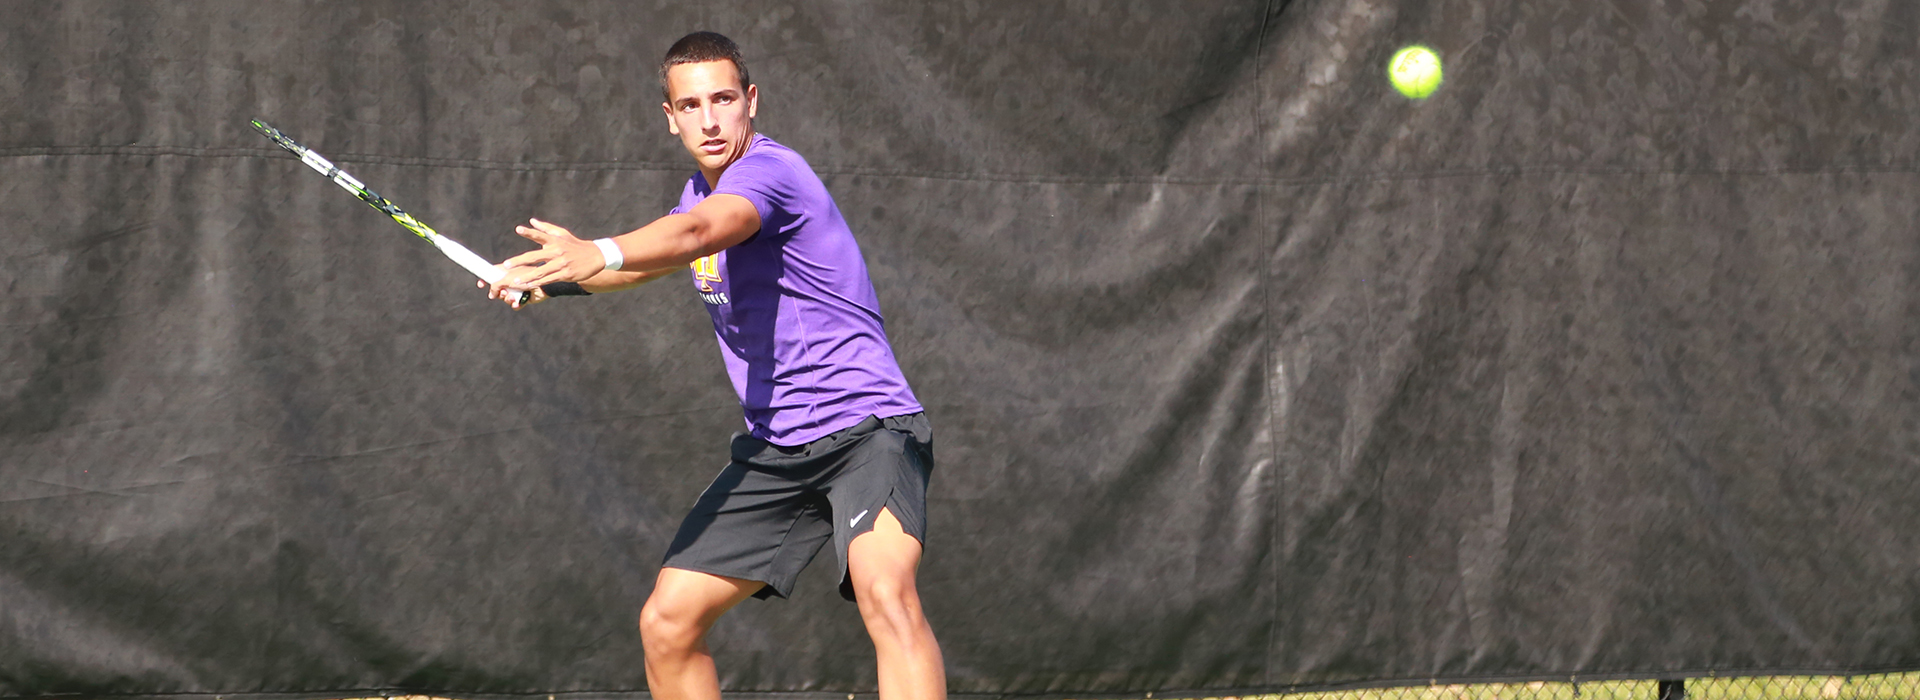 Golden Eagles close out fall slate with impressive doubles display at Wake Forest Invitational